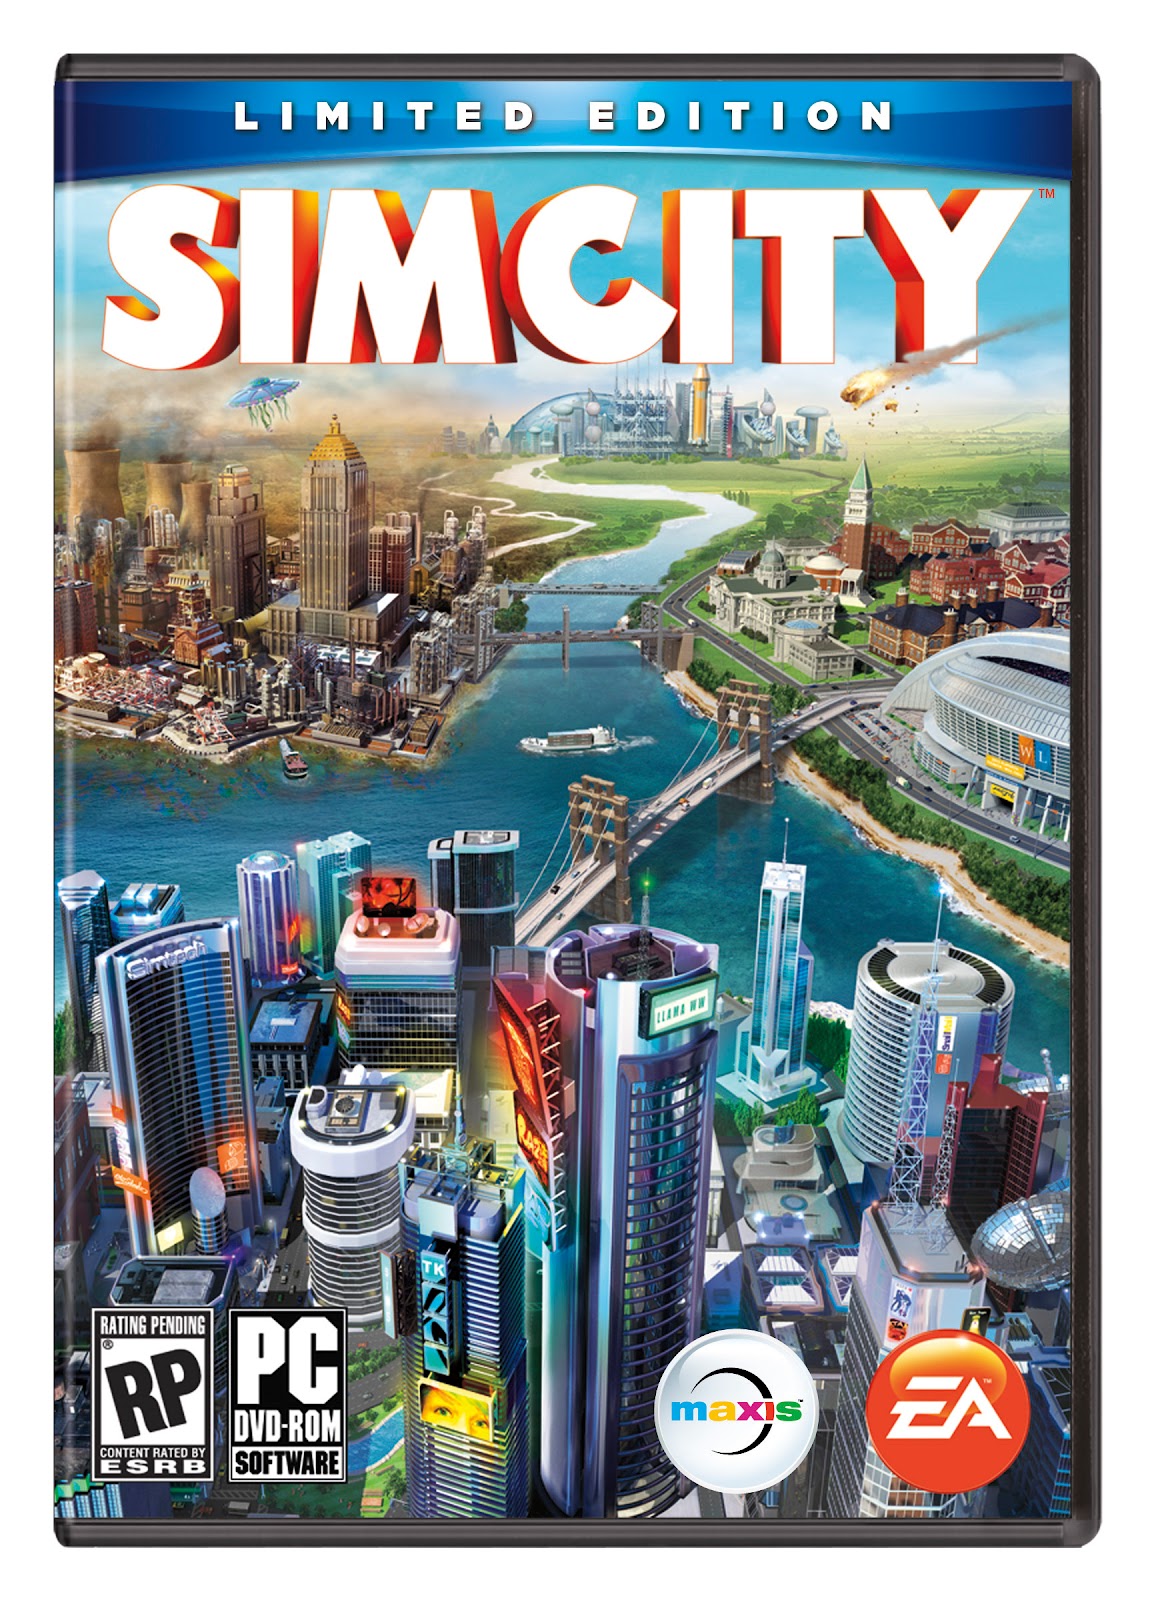 Free Download SimCity Games Full Version For PS3, PS4, PSP, Xbox One ...